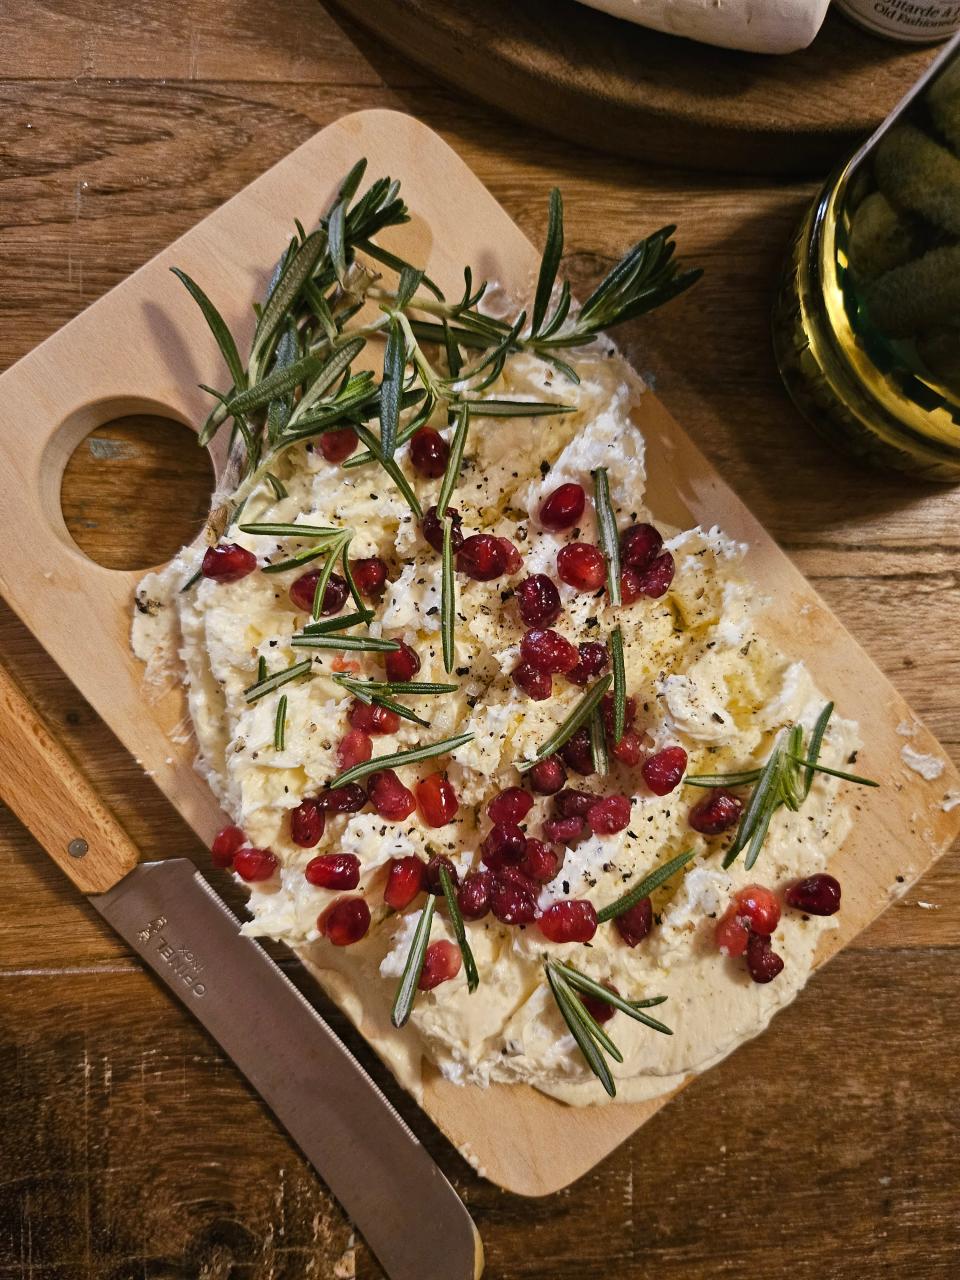 A butter board made by Courier Journal dining columnist Dana McMahan is topped with pomegranate seeds and fresh rosemary.